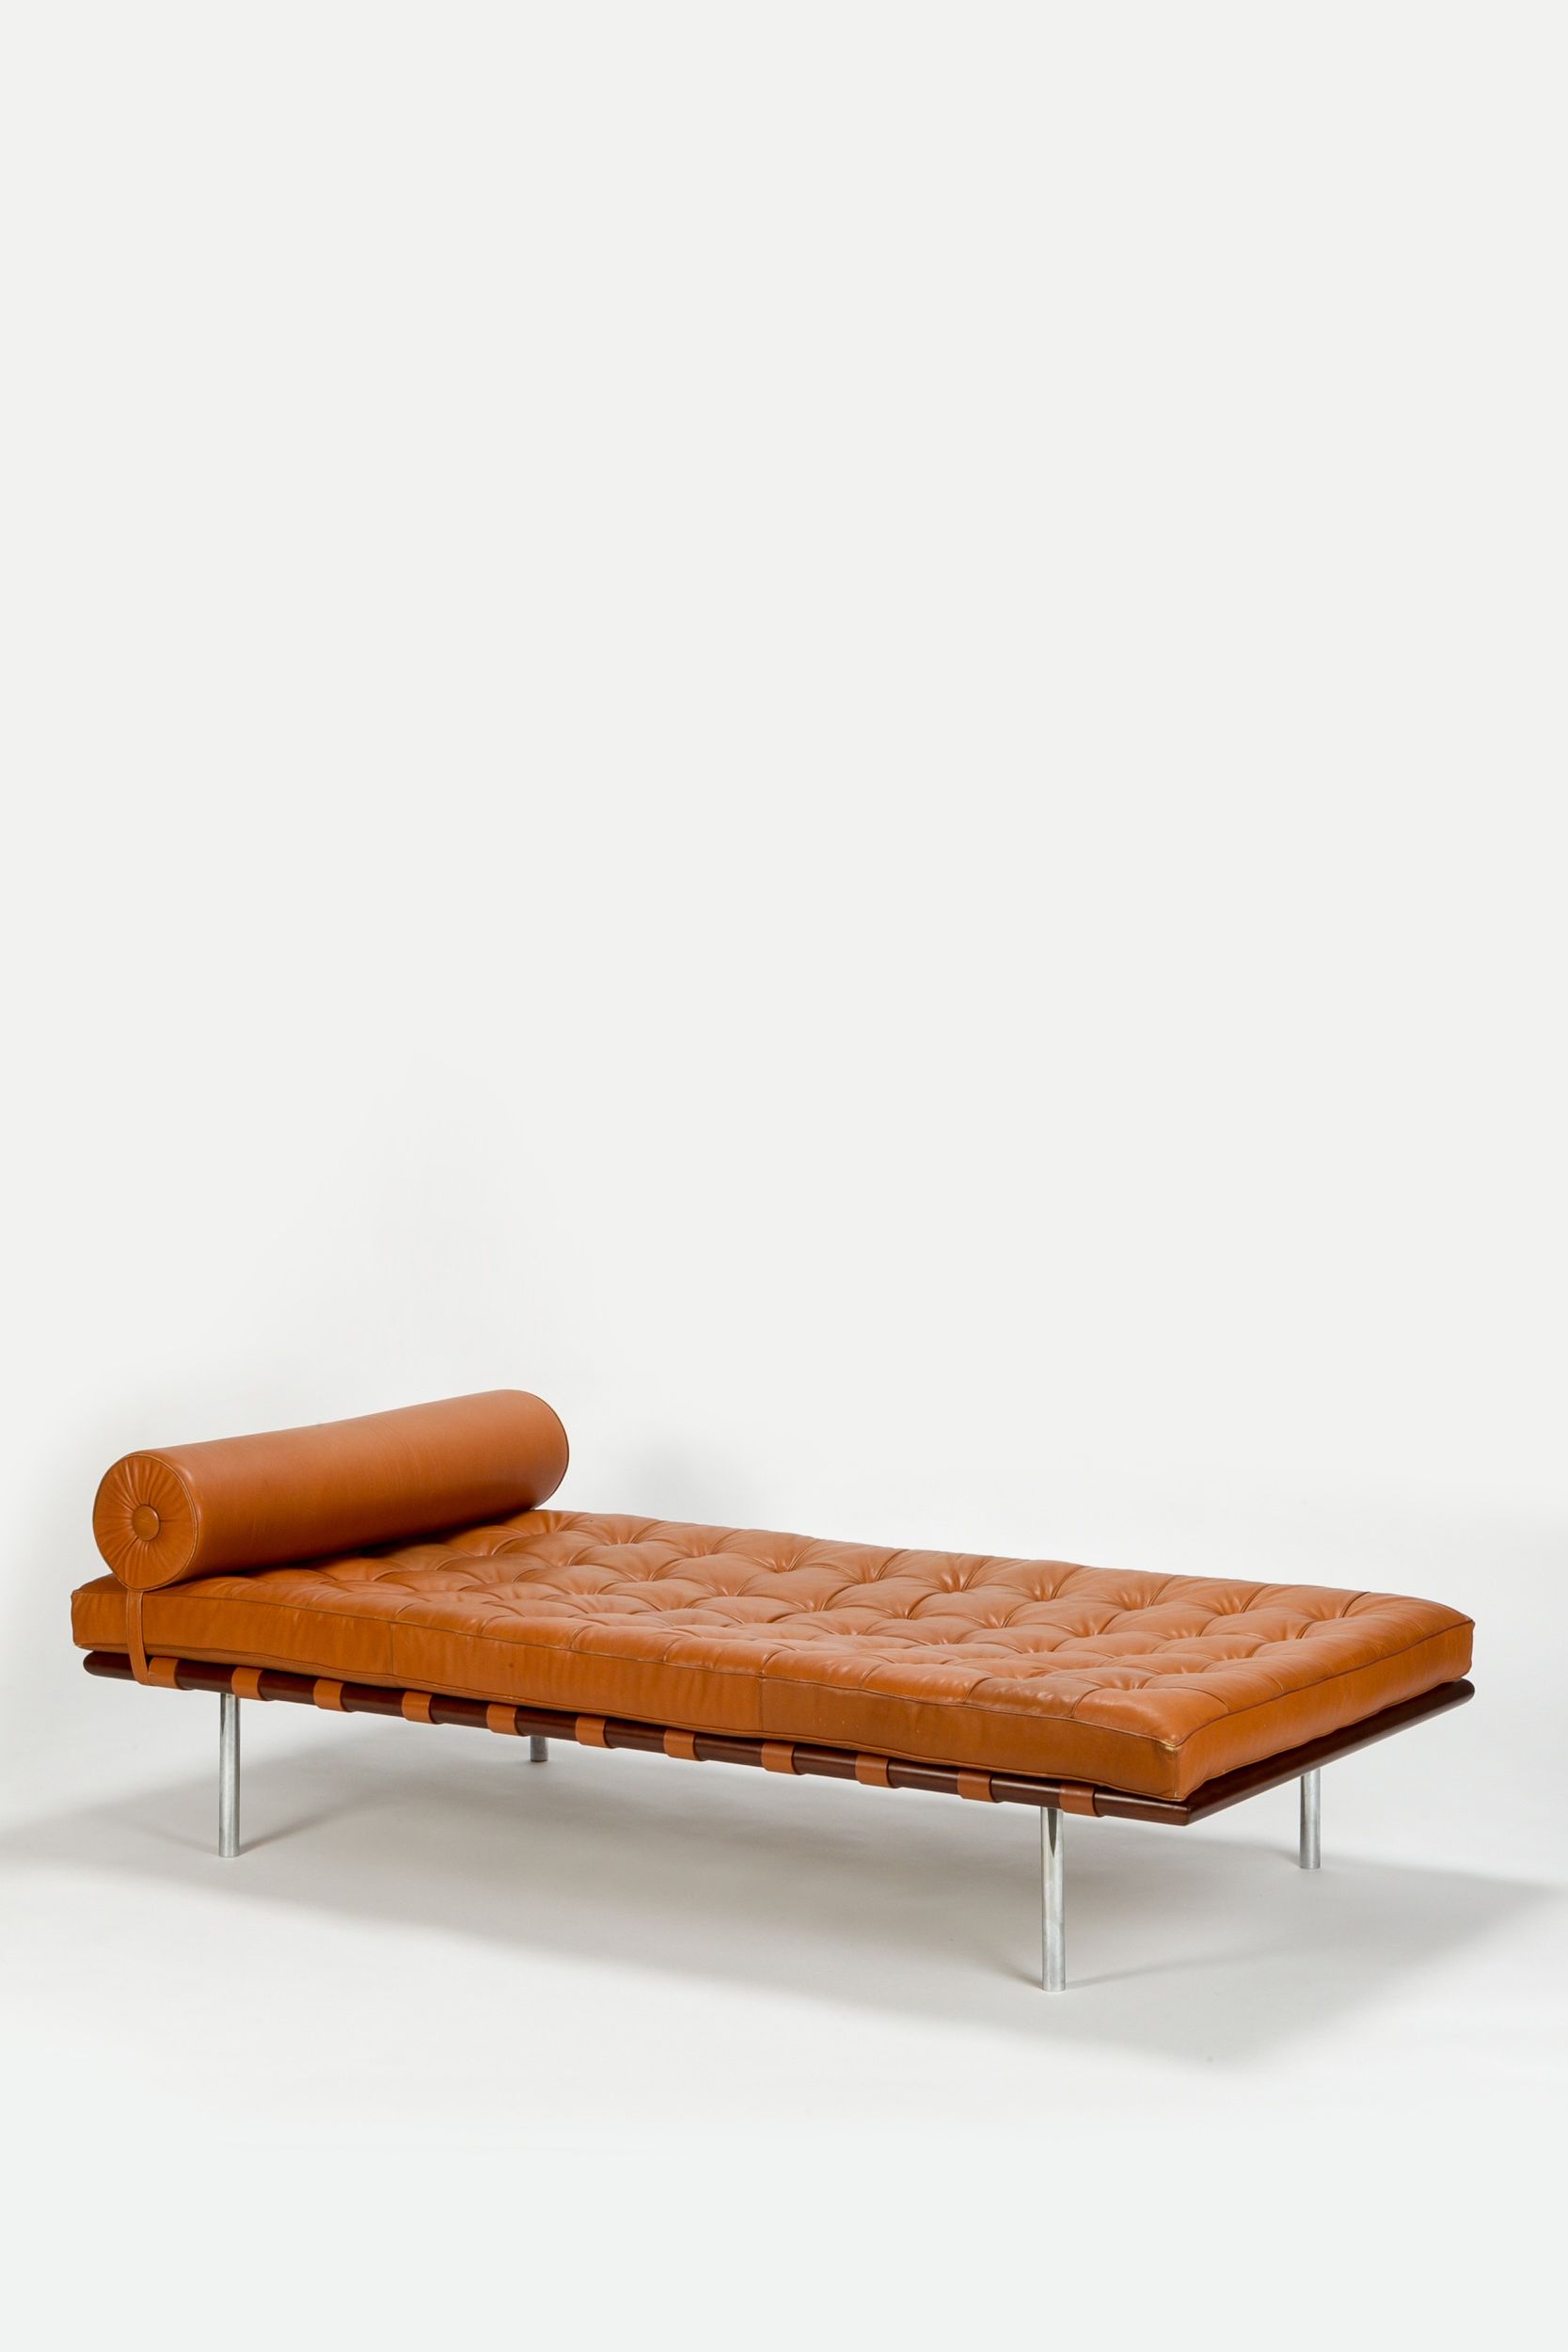 Daybed Designs: Stylish and Functional Furniture for Lounging